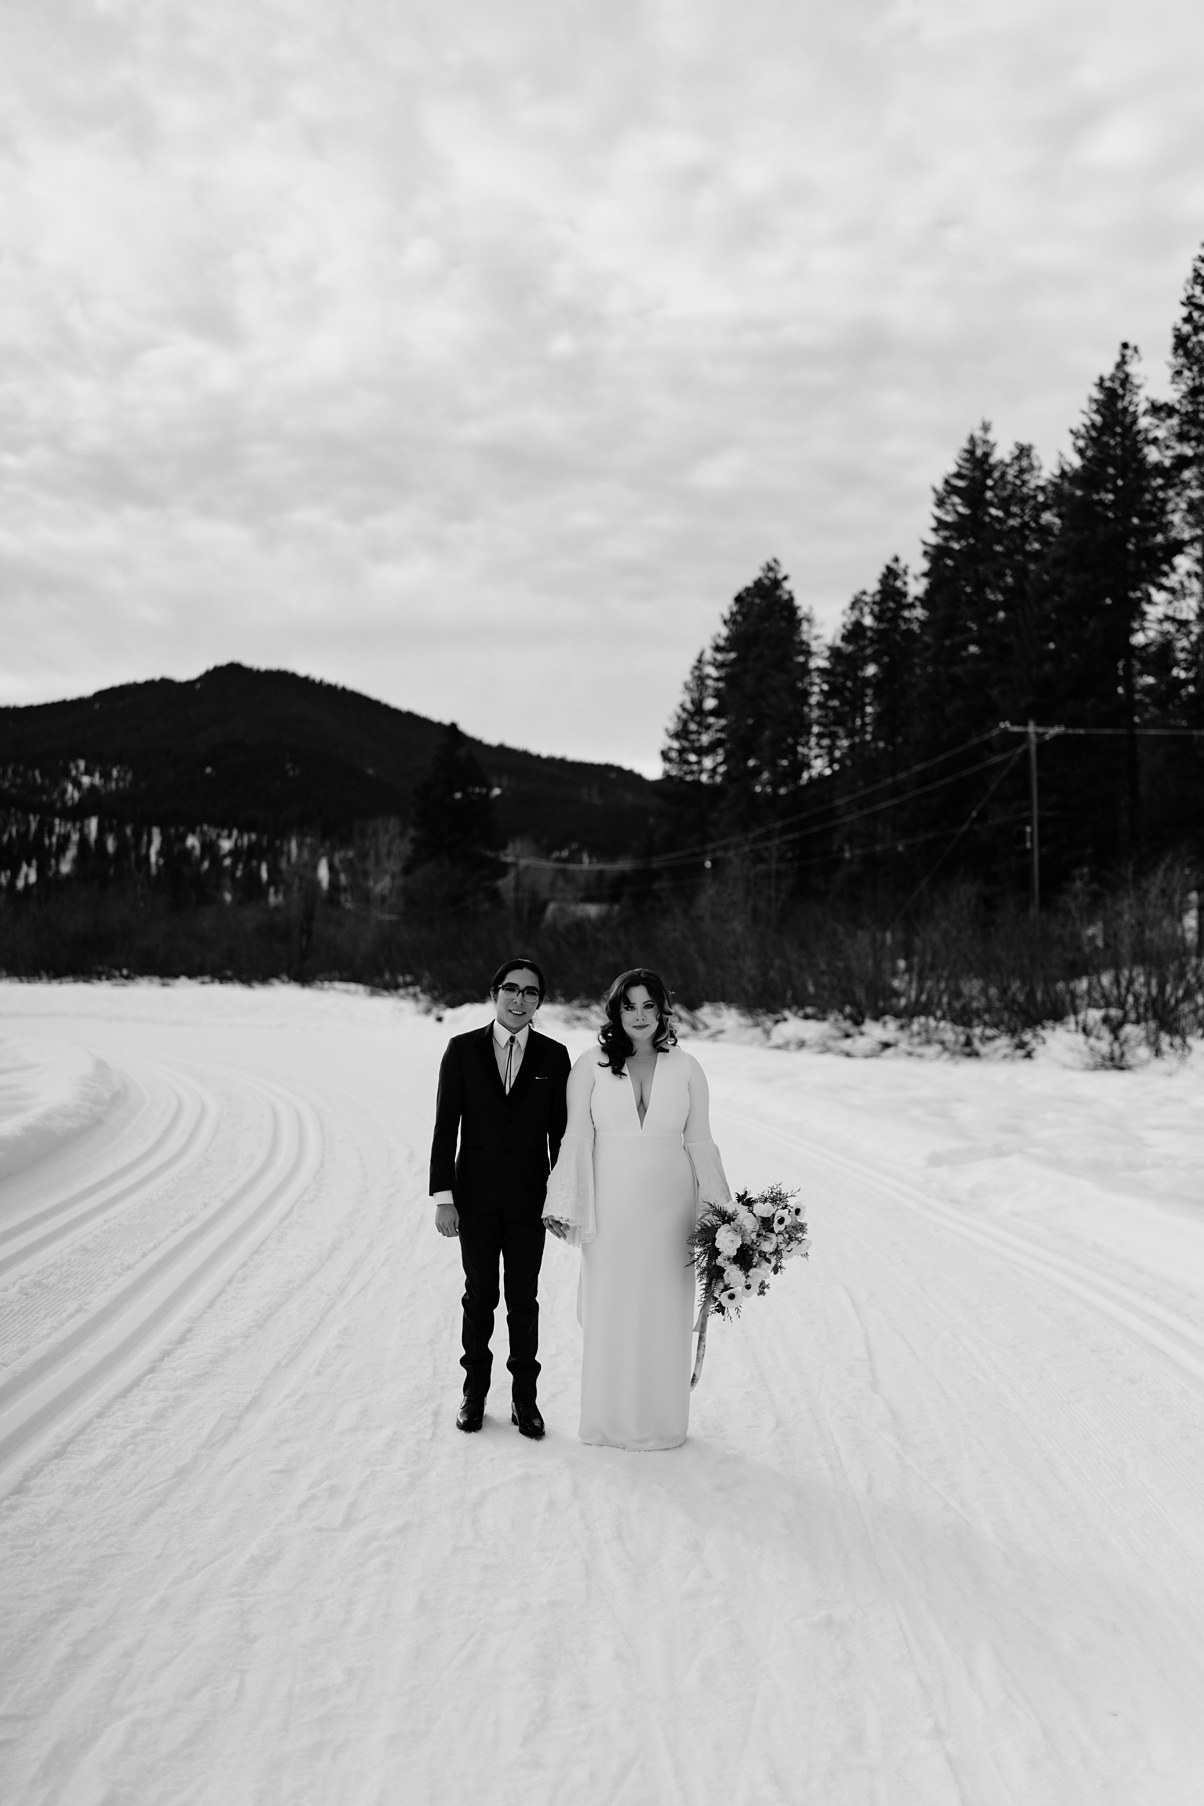 The couple holding hands in the snow, in a black and white image